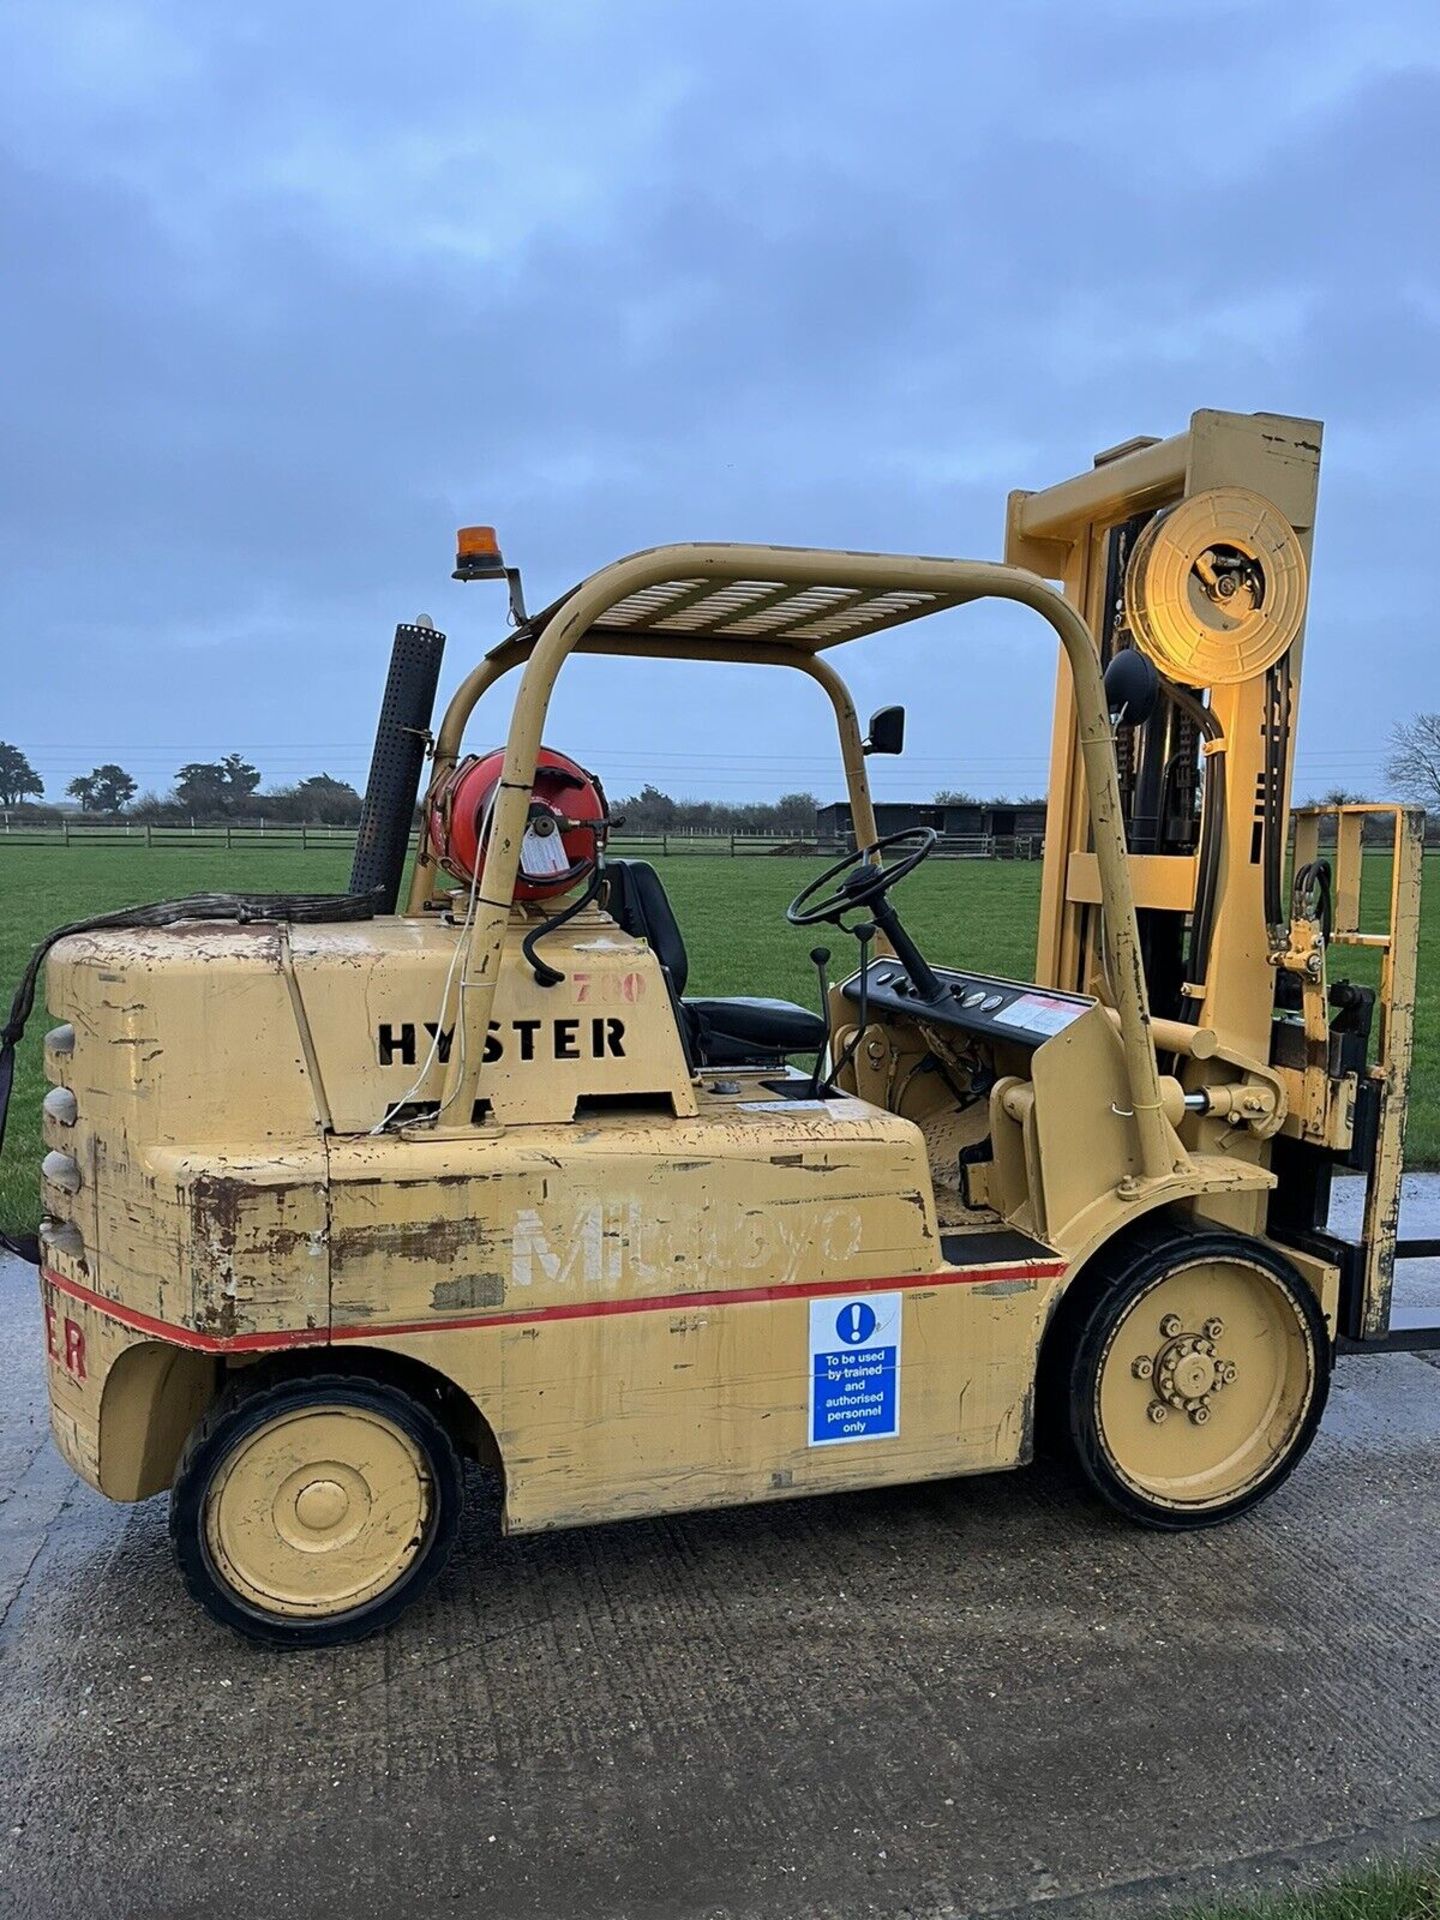 Hyster 7 Tonne Gas Forklift Compact Specialist Truck - Image 2 of 8